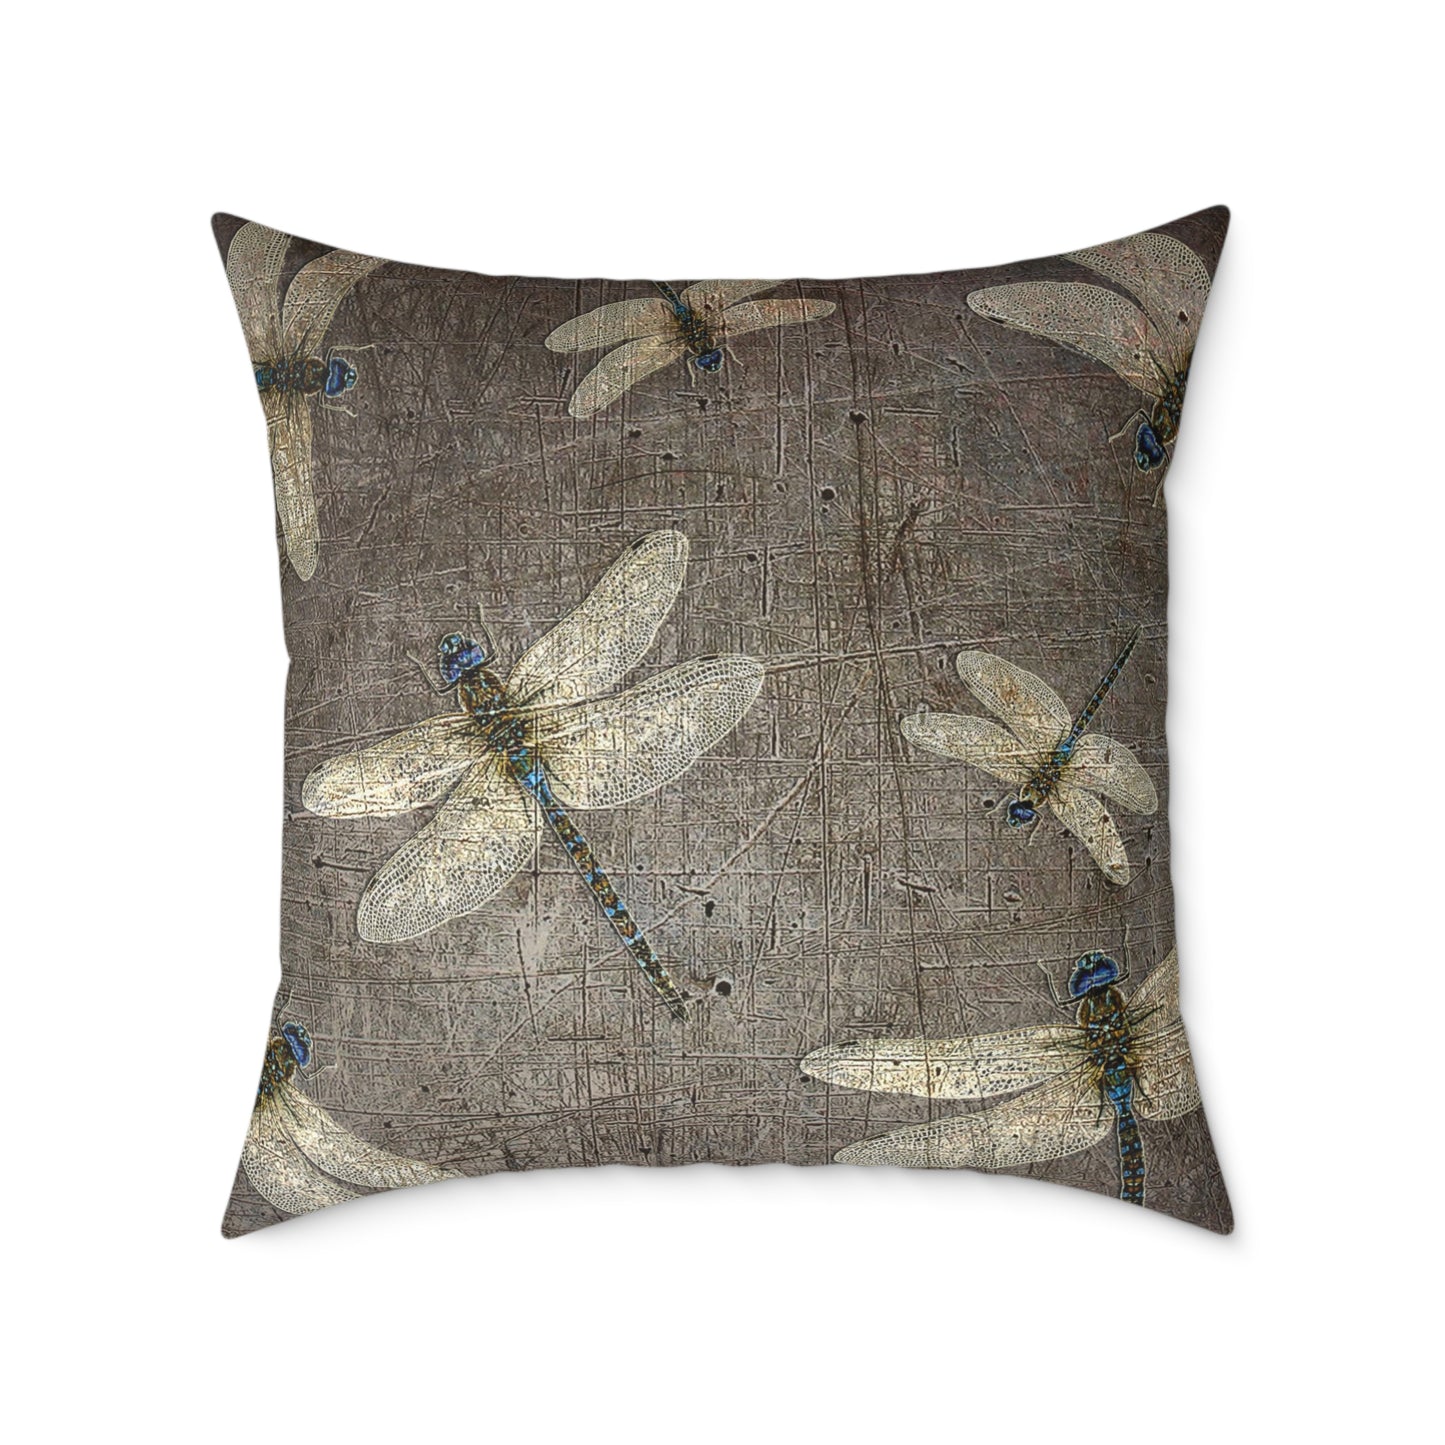 Large Double Sided Throw Pillow Dragonfly on Distressed Grey Stone Print - Dragonfly Themed Home Decor back